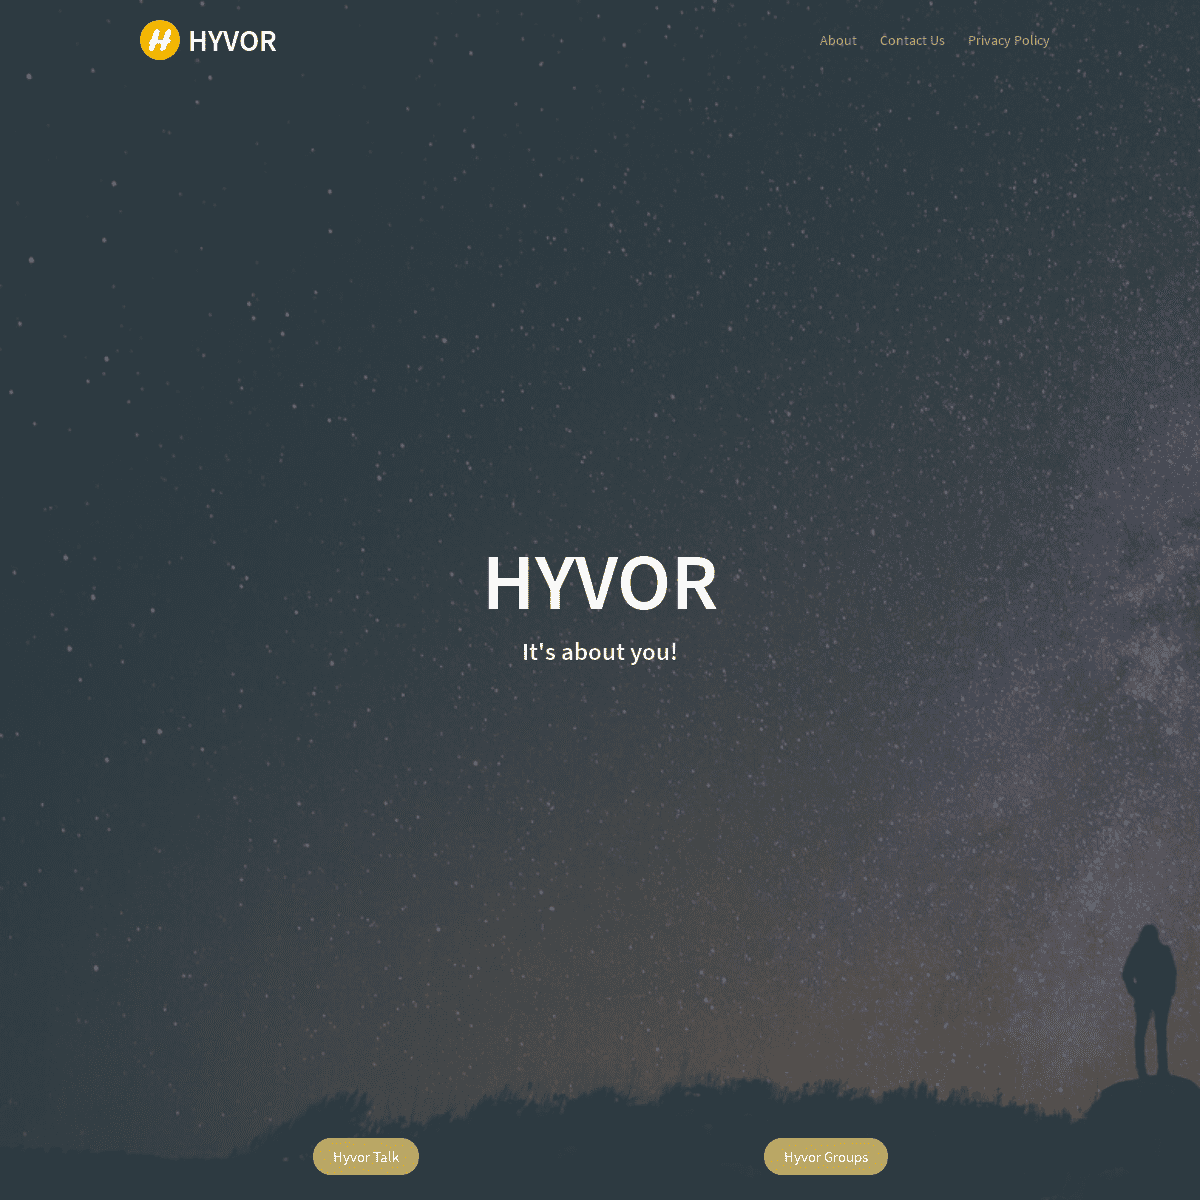 Hyvor - It's about you!